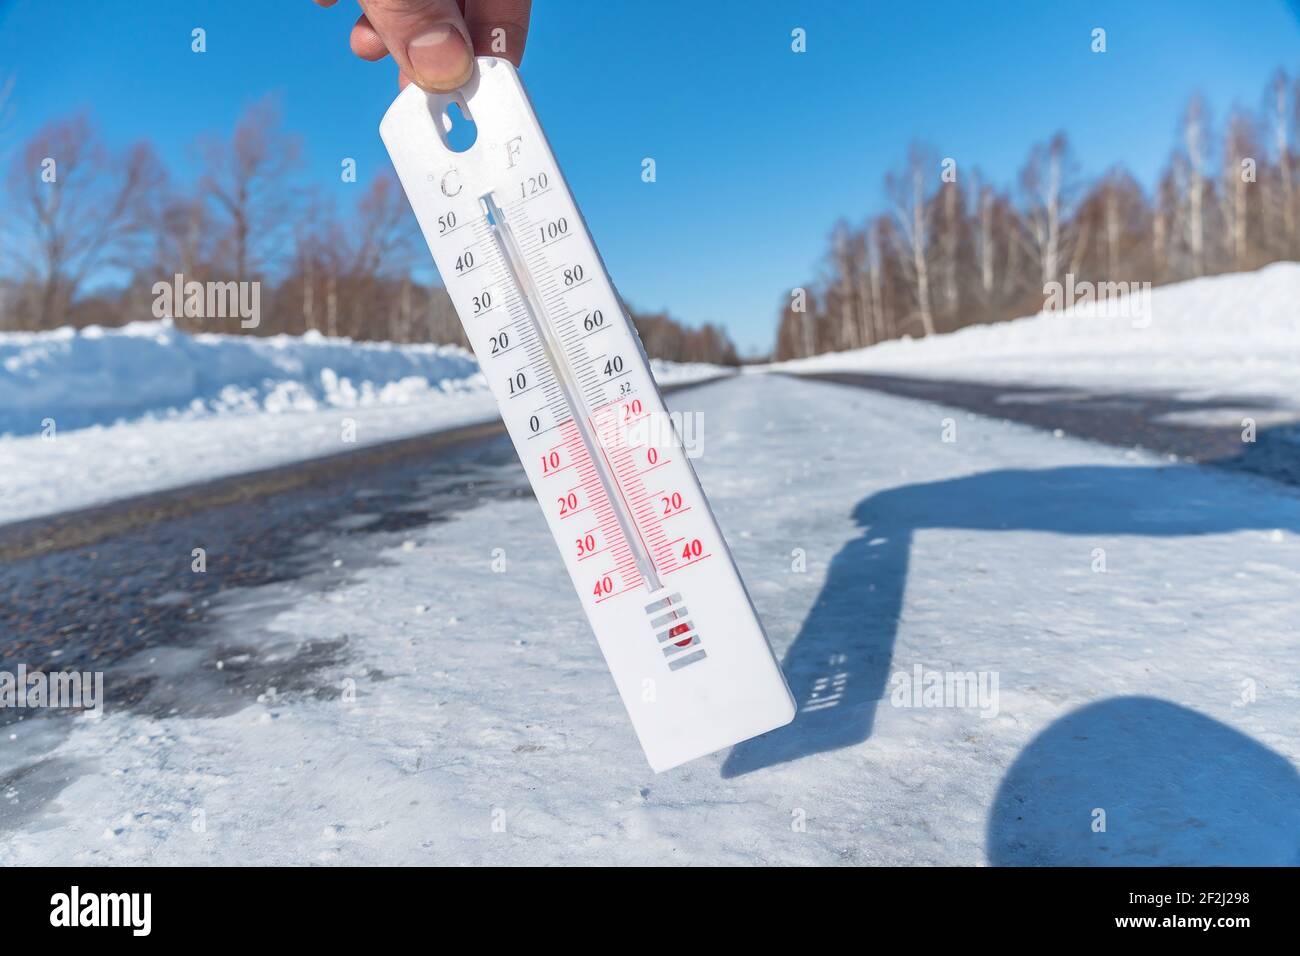 https://c8.alamy.com/comp/2F2J298/the-thermometer-shows-a-negative-temperature-in-cold-weather-against-the-background-of-an-icy-road-or-highwaypoor-weather-conditions-with-low-tempera-2F2J298.jpg